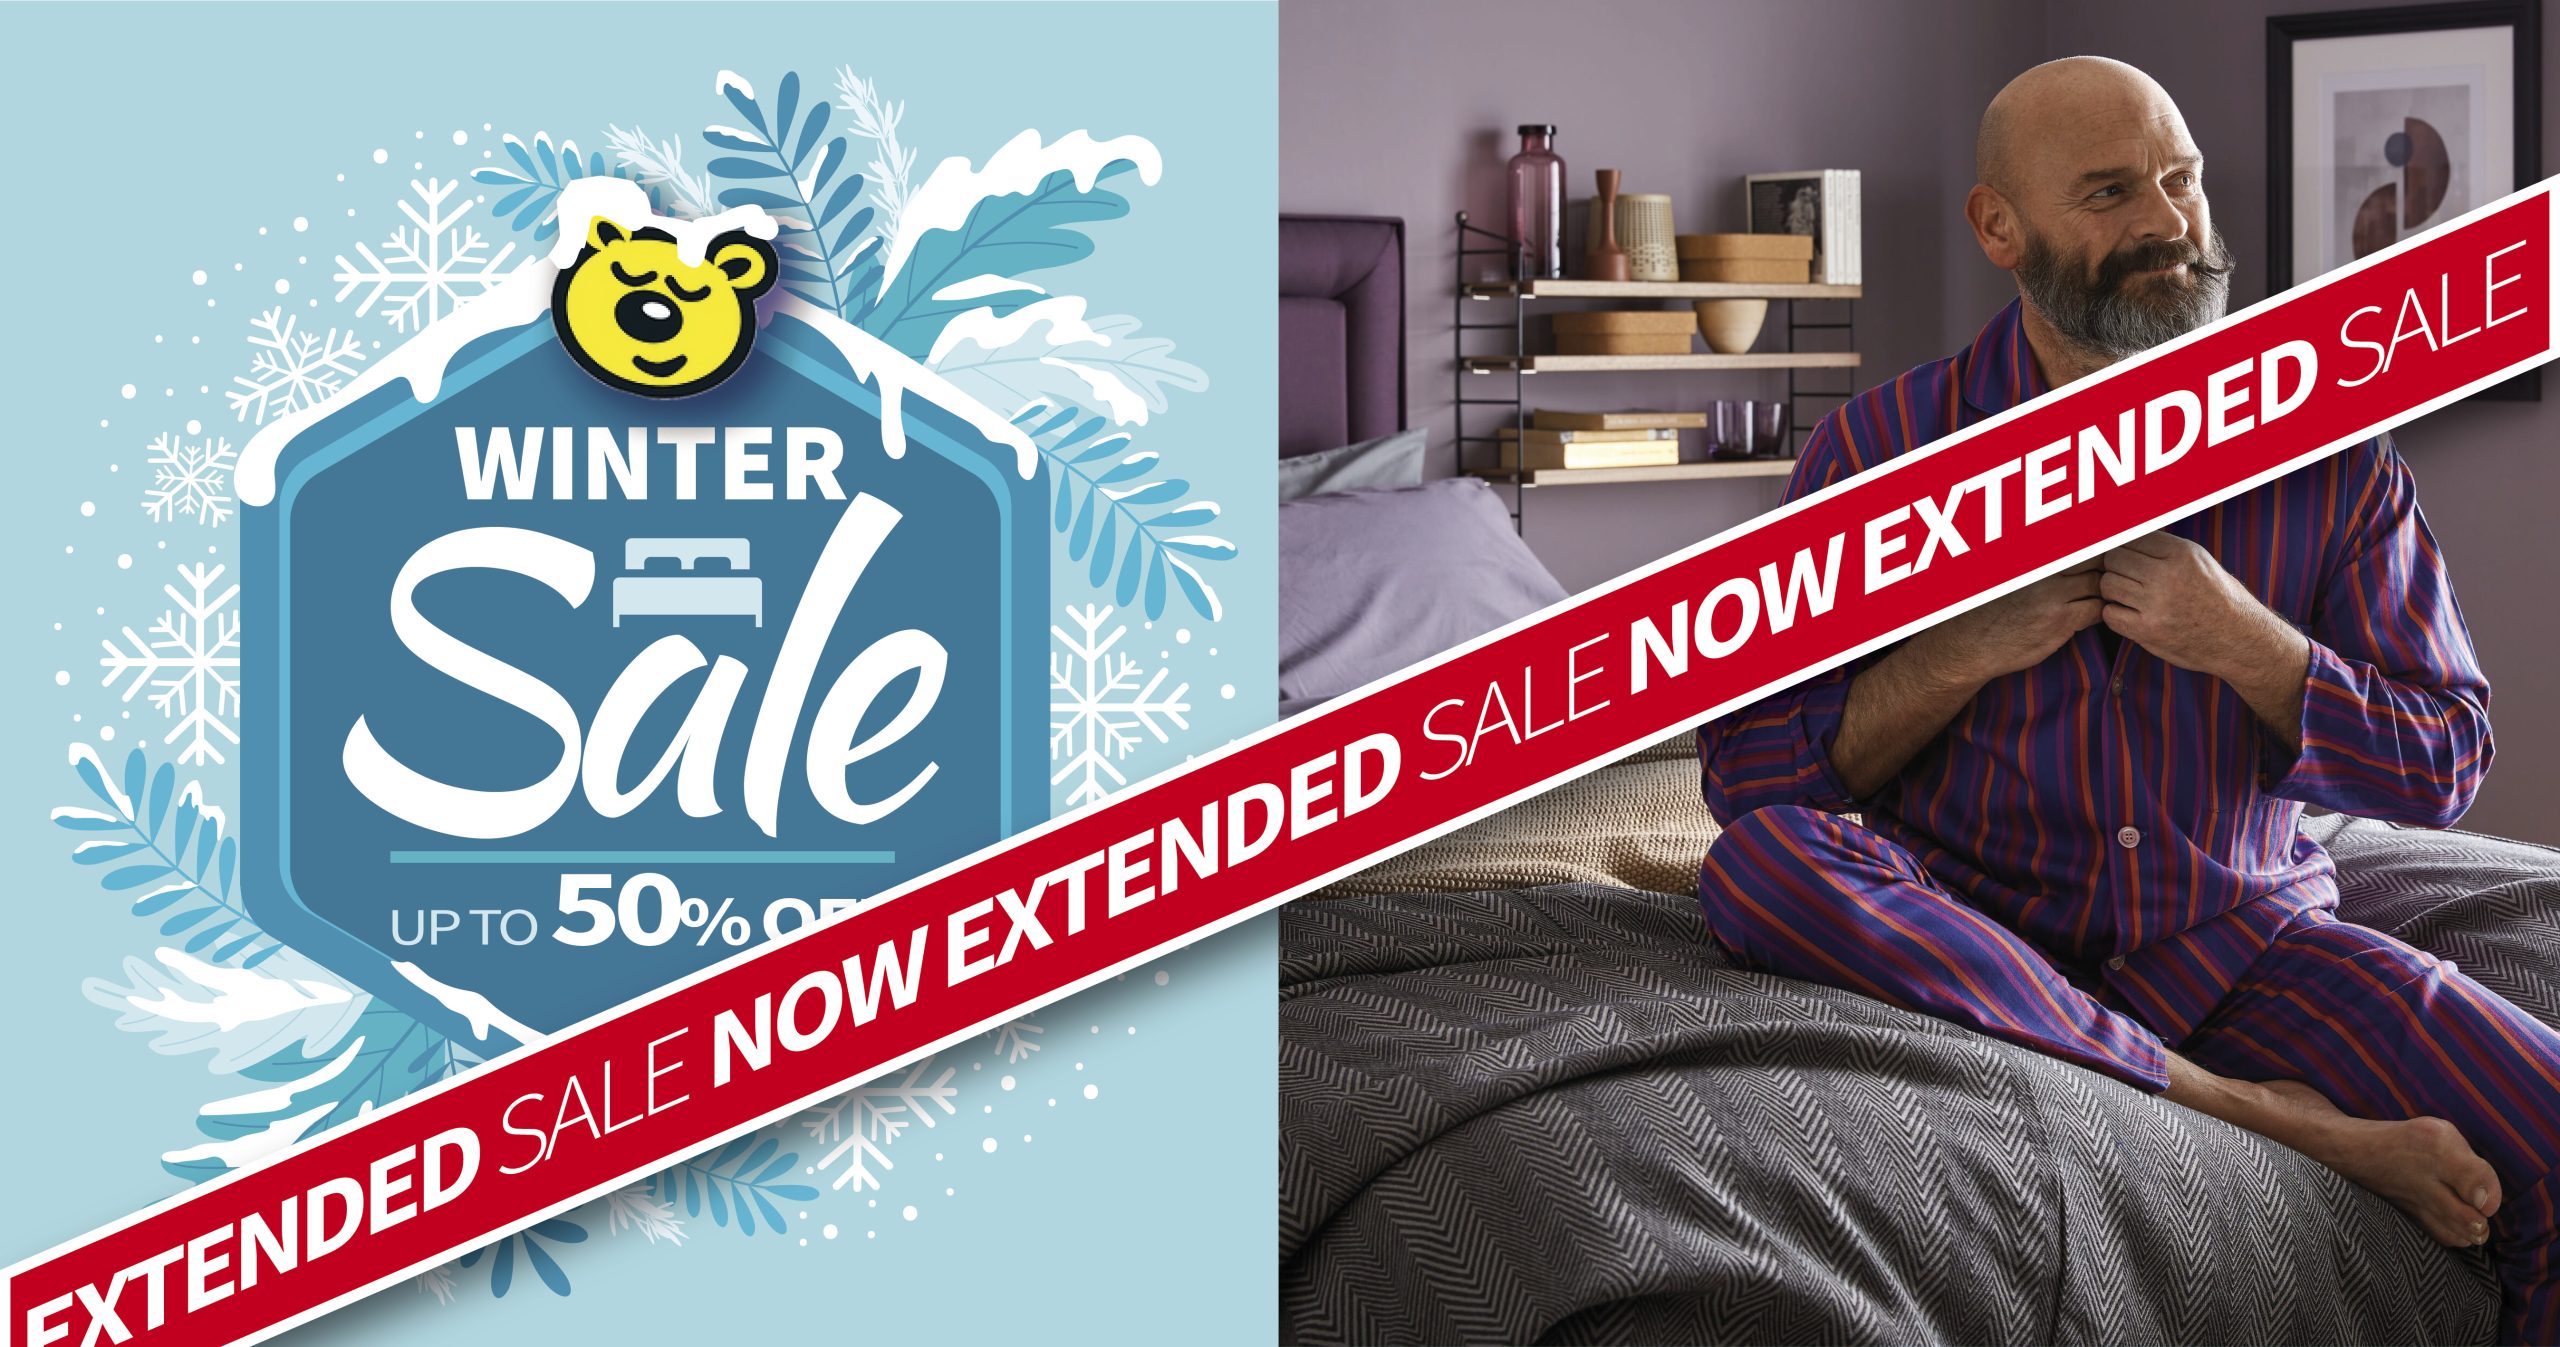 Winter Bed Sale EXTENDED